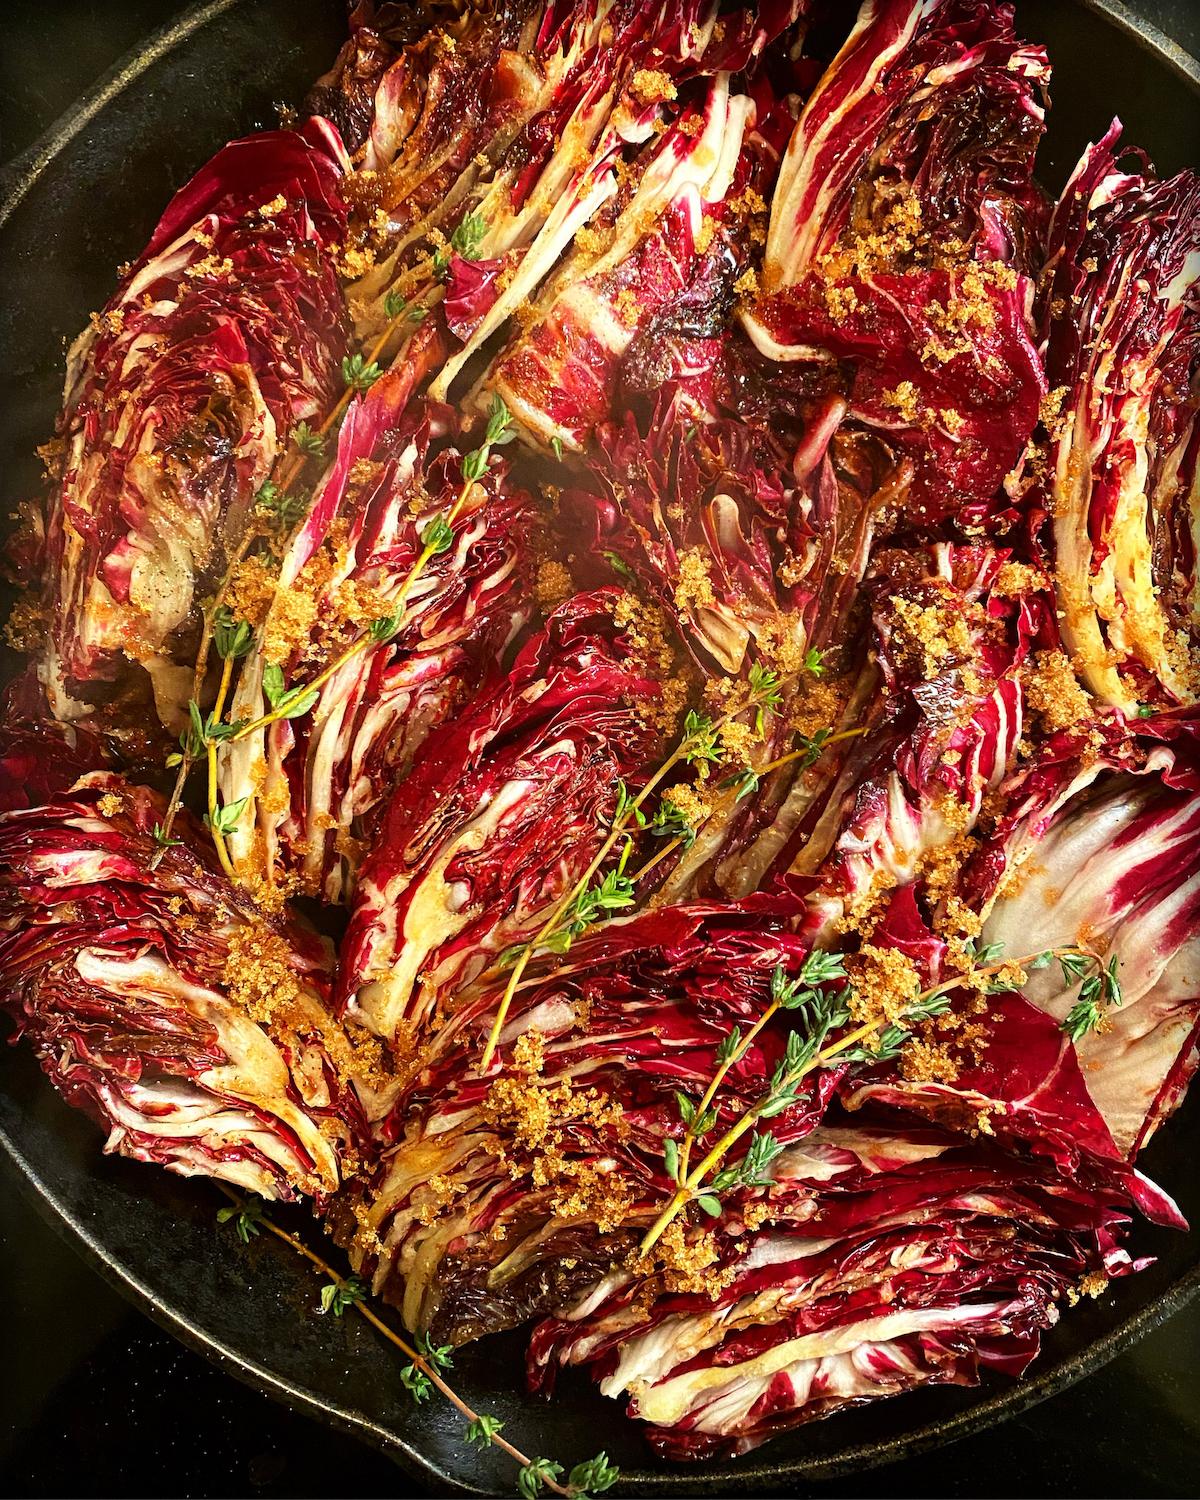 As the radicchio braises, the balsamic vinegar will reduce to a rich sweet-and-sour syrup that shellacs the wilted wedges. (Lynda Balslev for Tastefood)